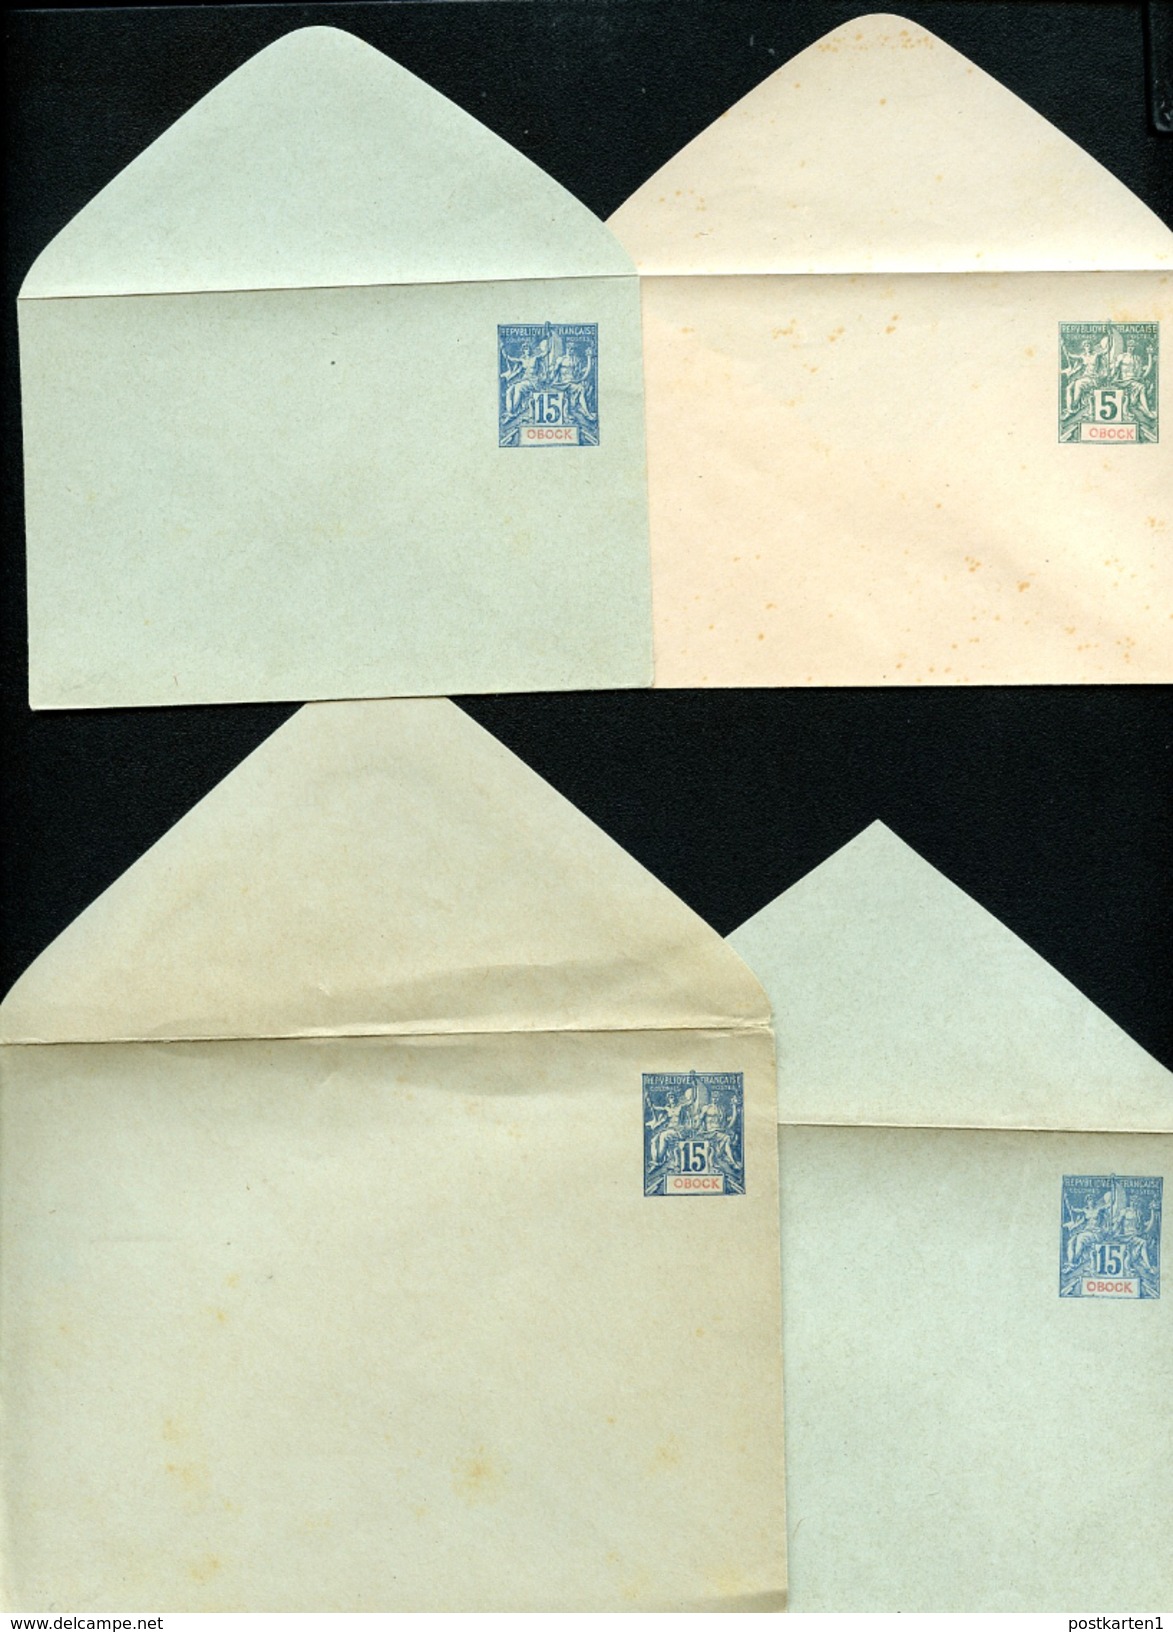 OBOCK DJIBOUTI Complete Set Of 4 Envelopes #B1-2b Mint 1892 - Covers & Documents